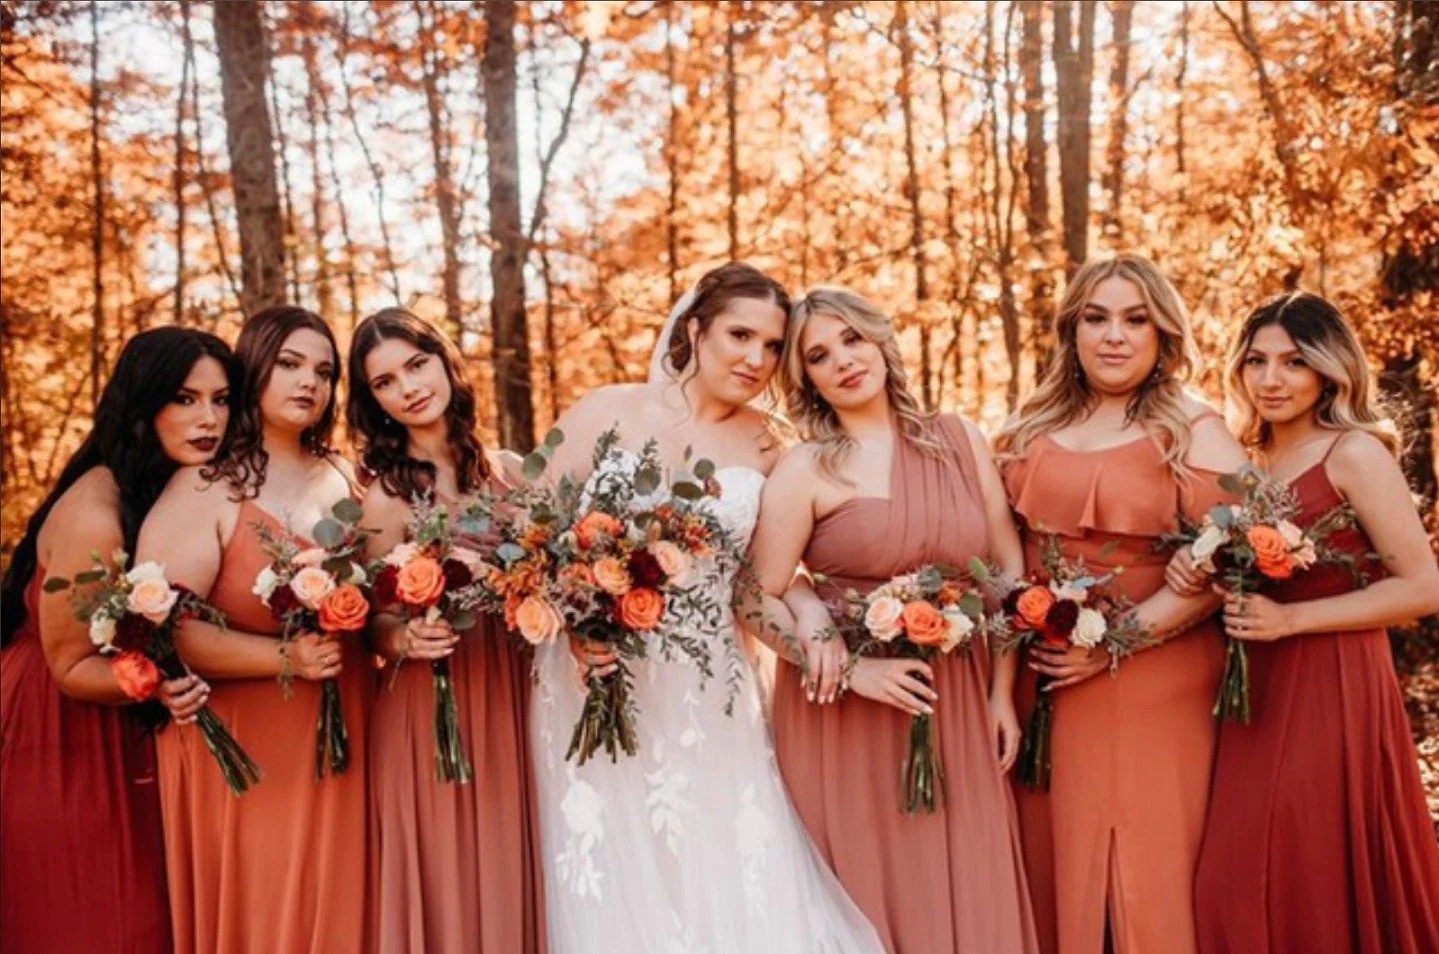 A bride and her beautiful maids of honor